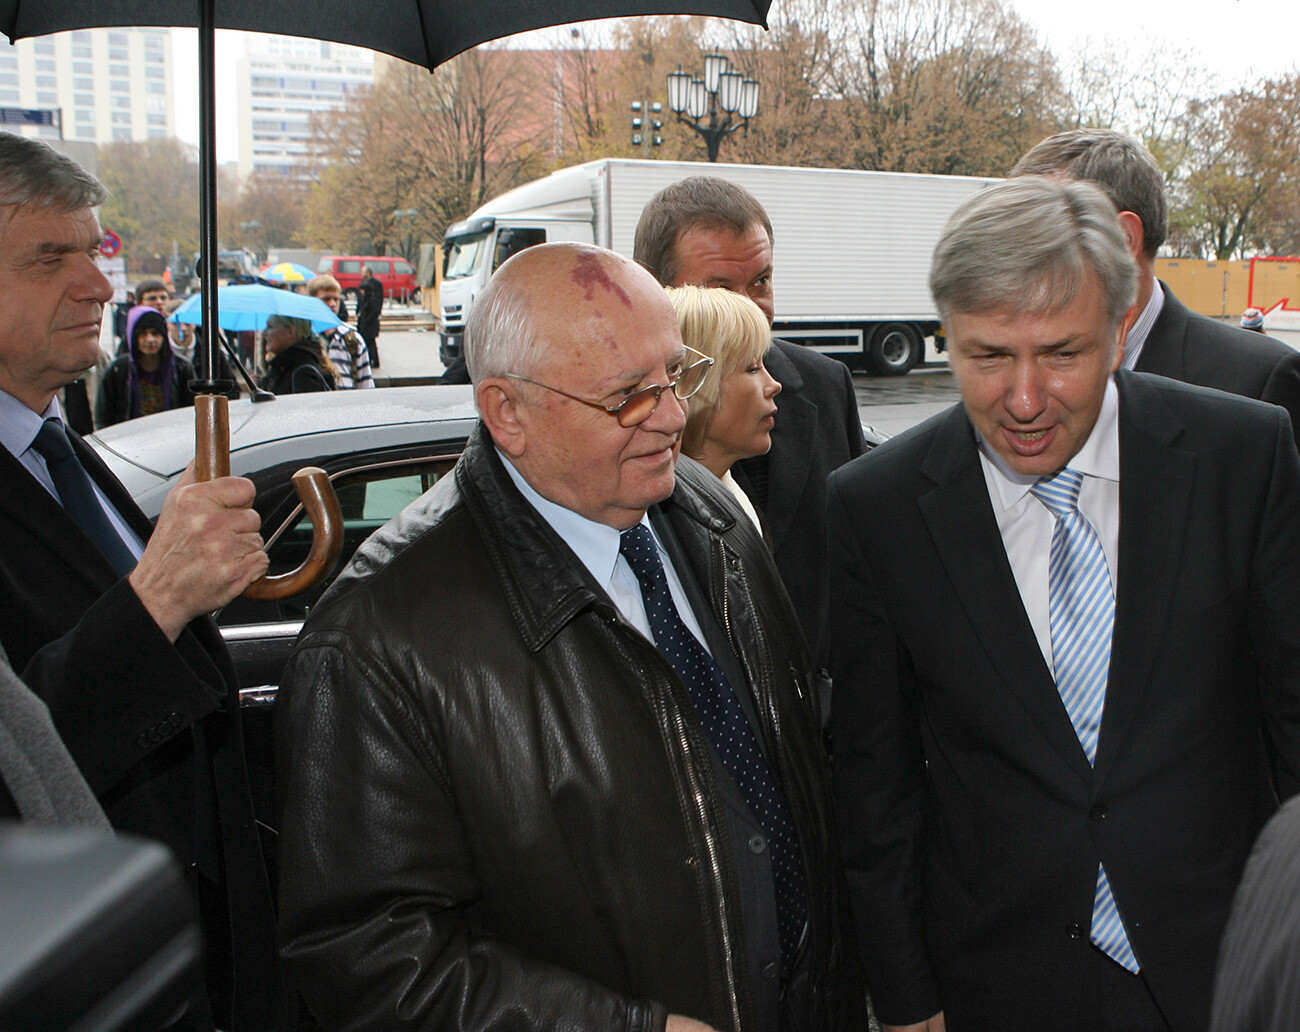 Mikhail Gorbachev (left) is an honorary guest of the celebration of the 20th anniversary of the fall of the Berlin Wall – and Berlin Mayor Klaus Wowereit.